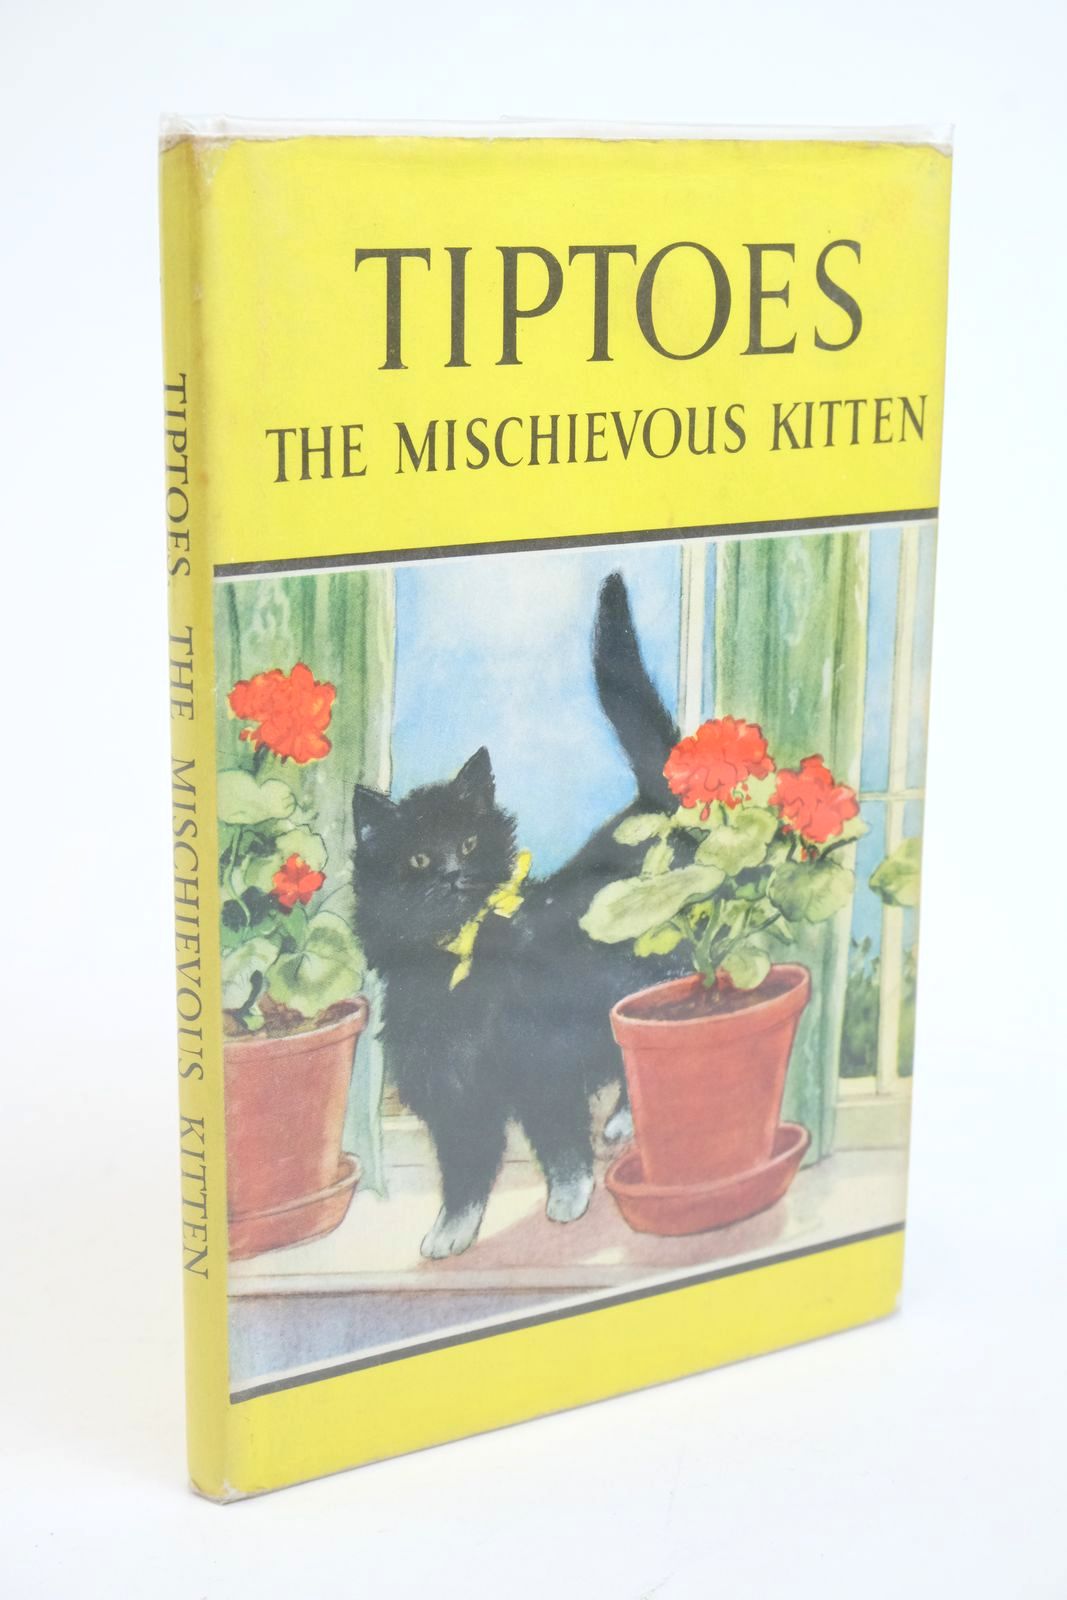 Photo of TIPTOES THE MISCHIEVOUS KITTEN written by Barr, Noel illustrated by Hickling, P.B. published by Wills & Hepworth Ltd. (STOCK CODE: 1322393)  for sale by Stella & Rose's Books